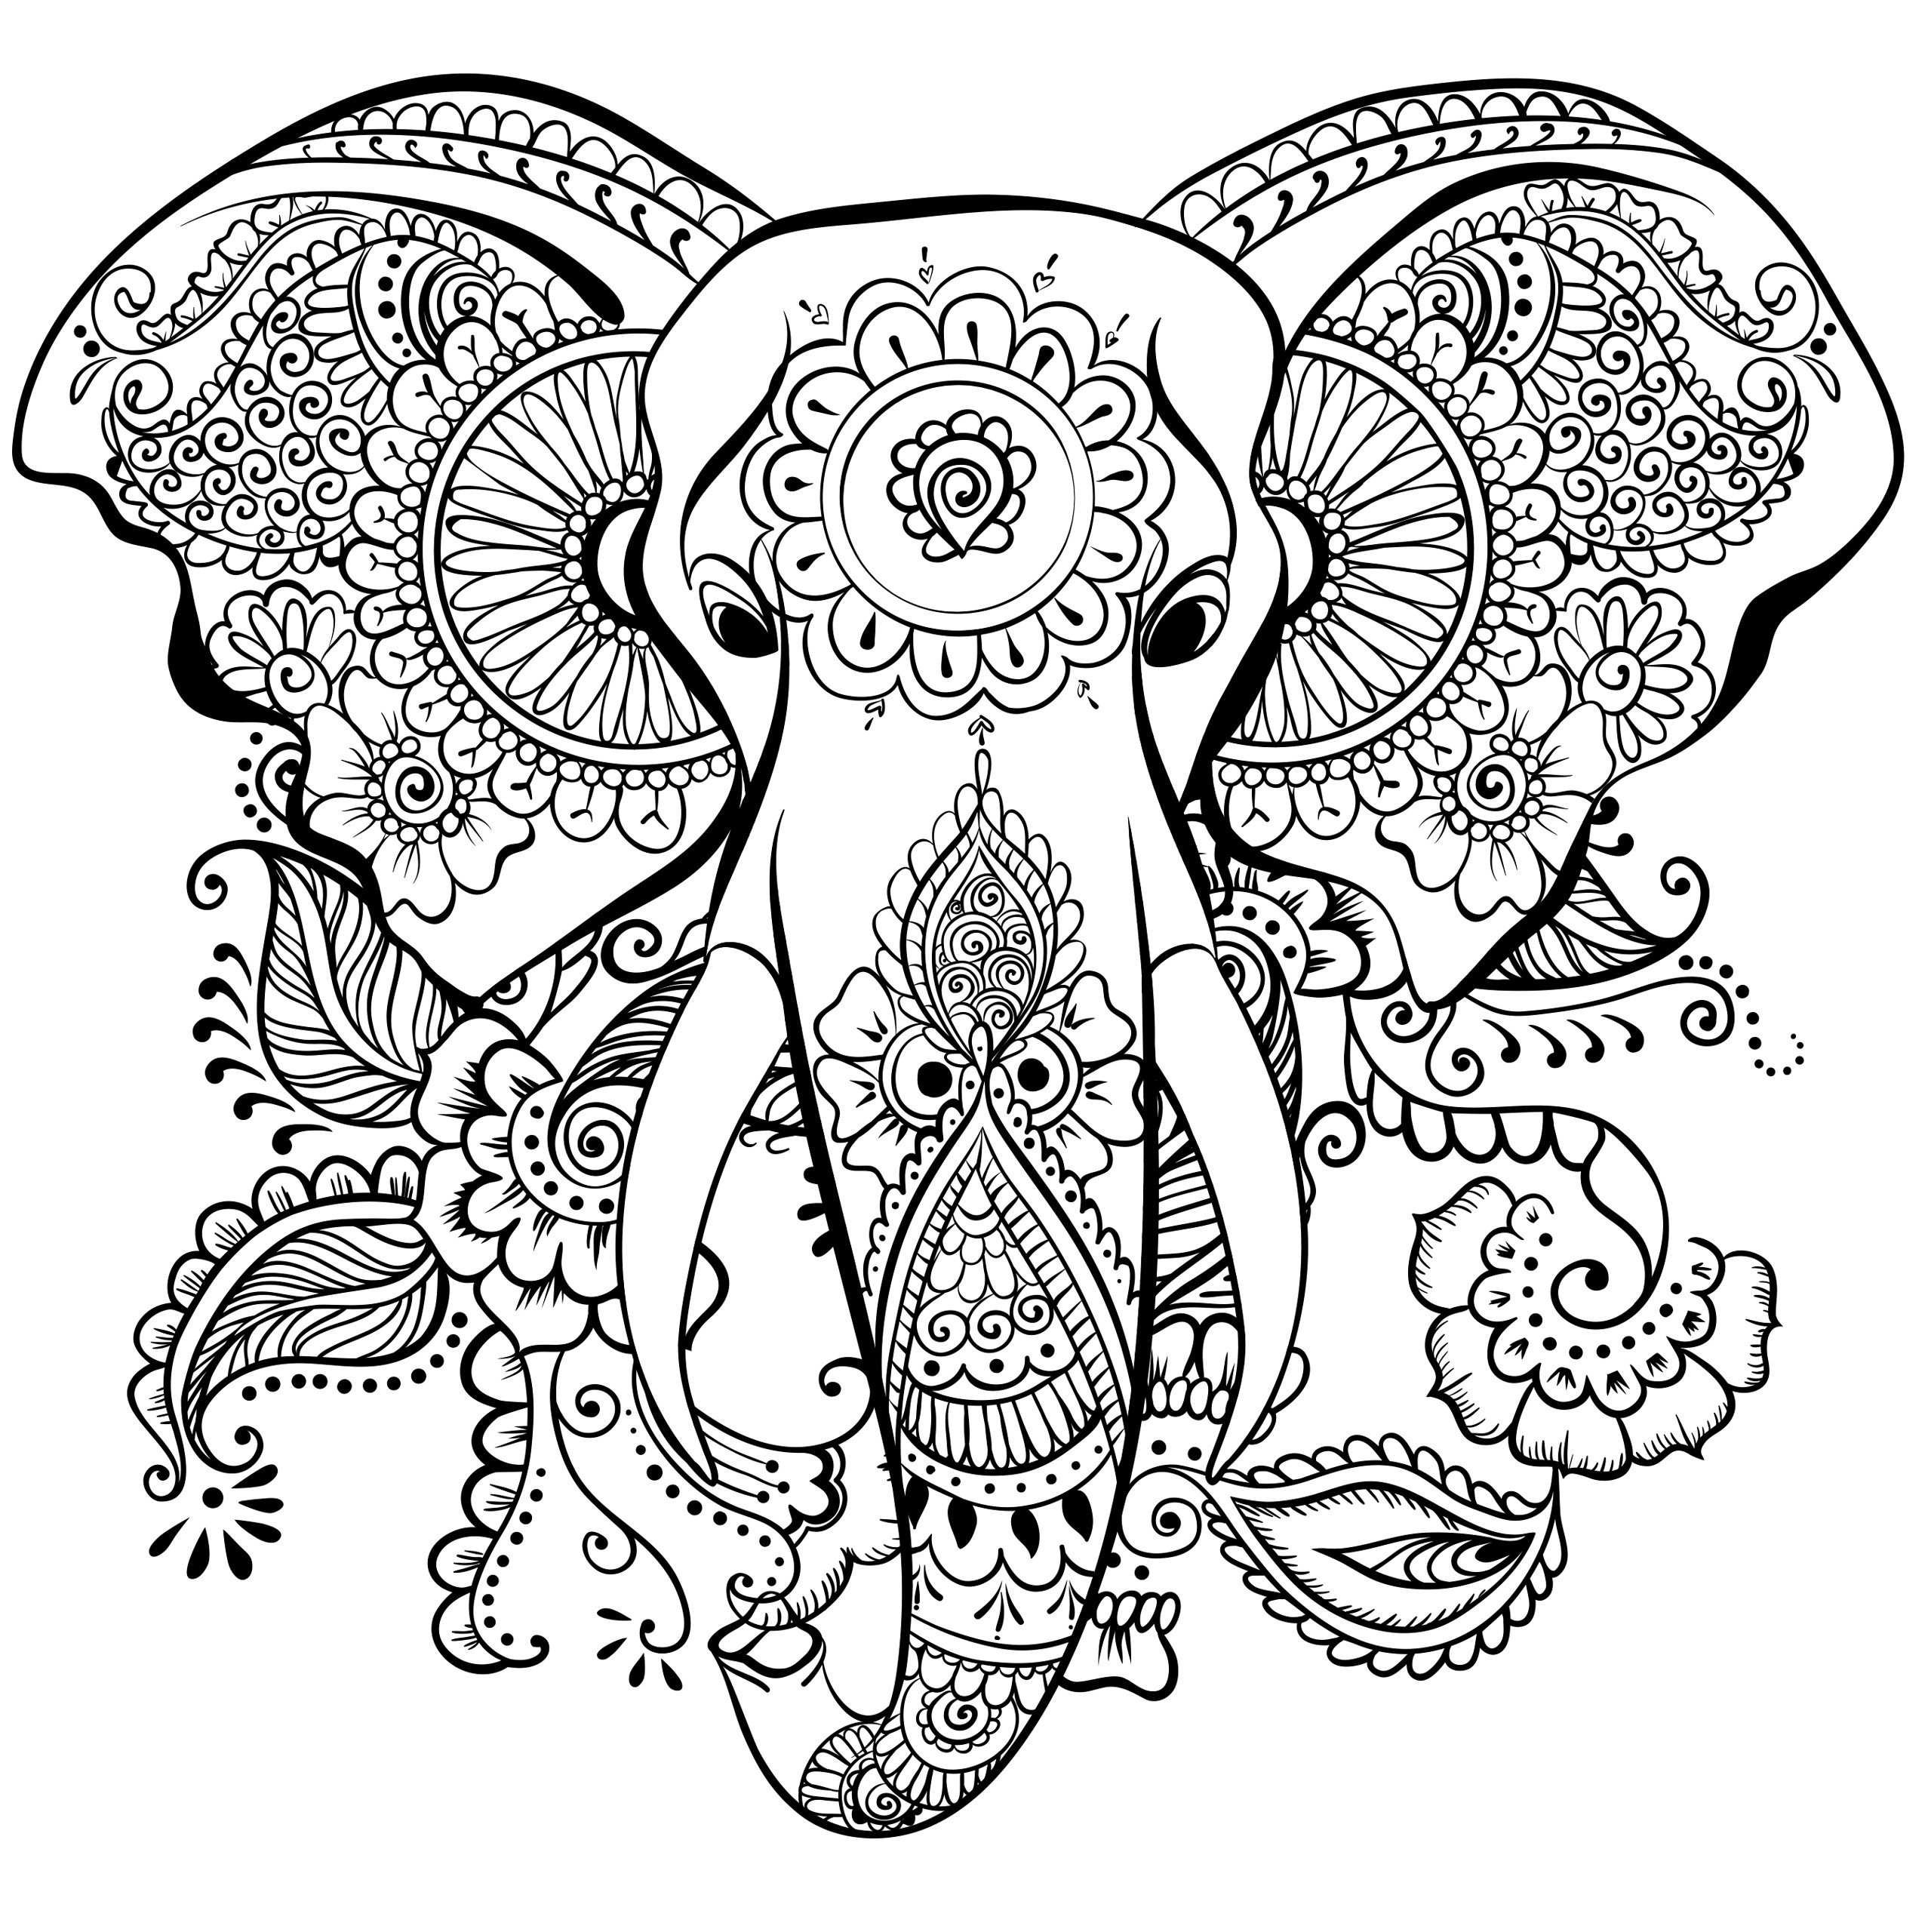 Coloring Pages Adult
 63 Adult Coloring Pages To Nourish Your Mental Visual